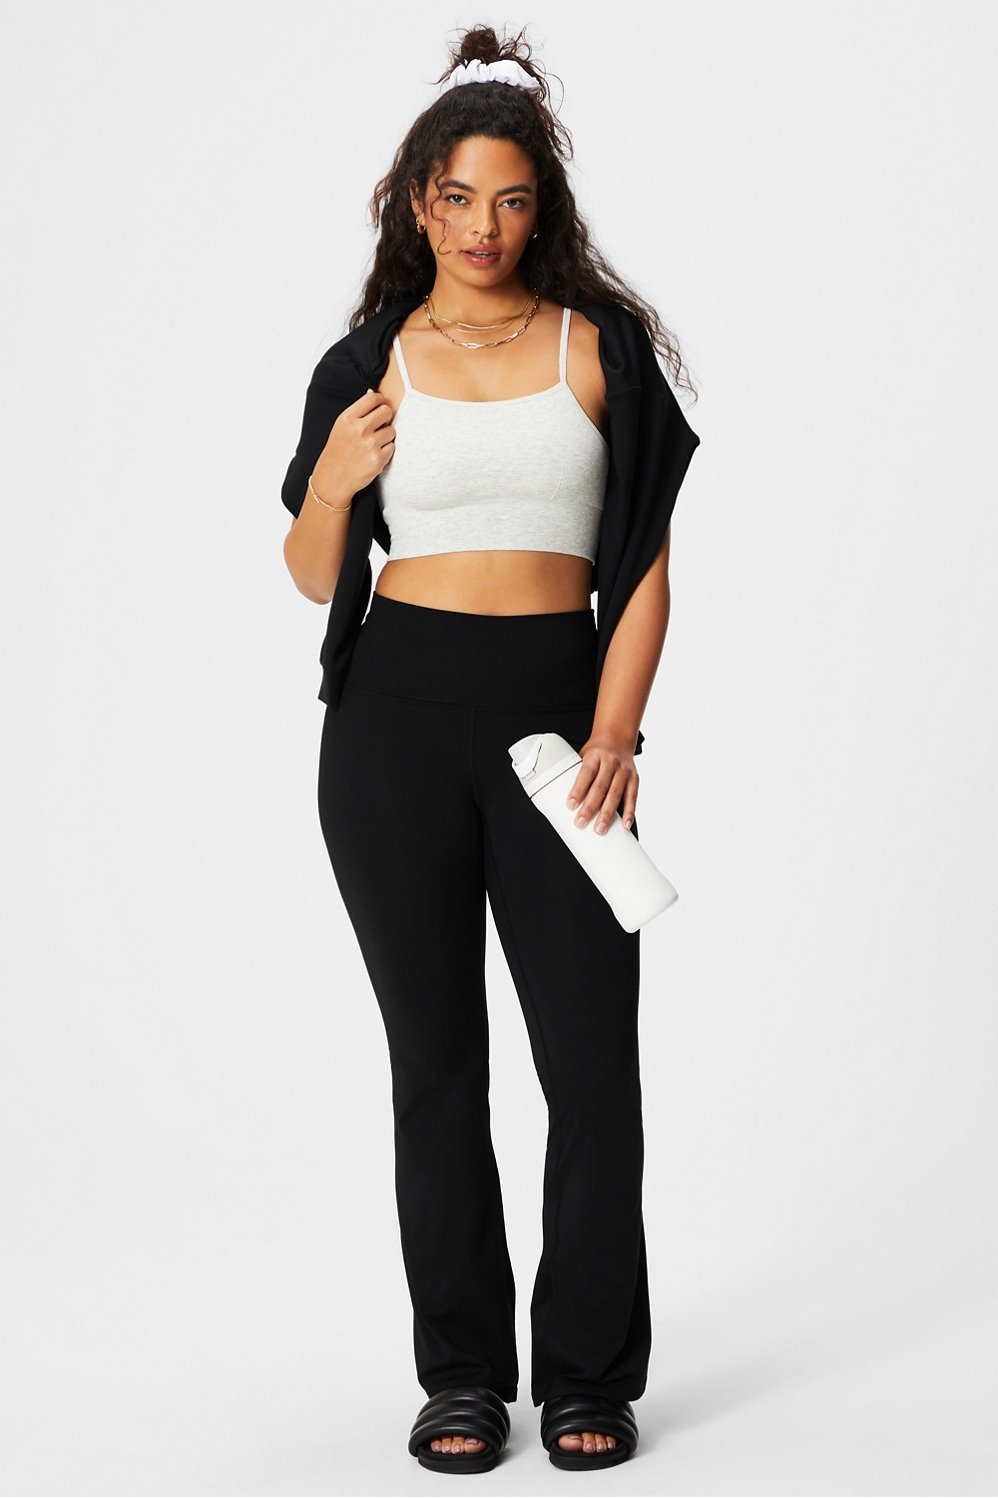 PureLuxe Ultra High-Waisted Flare